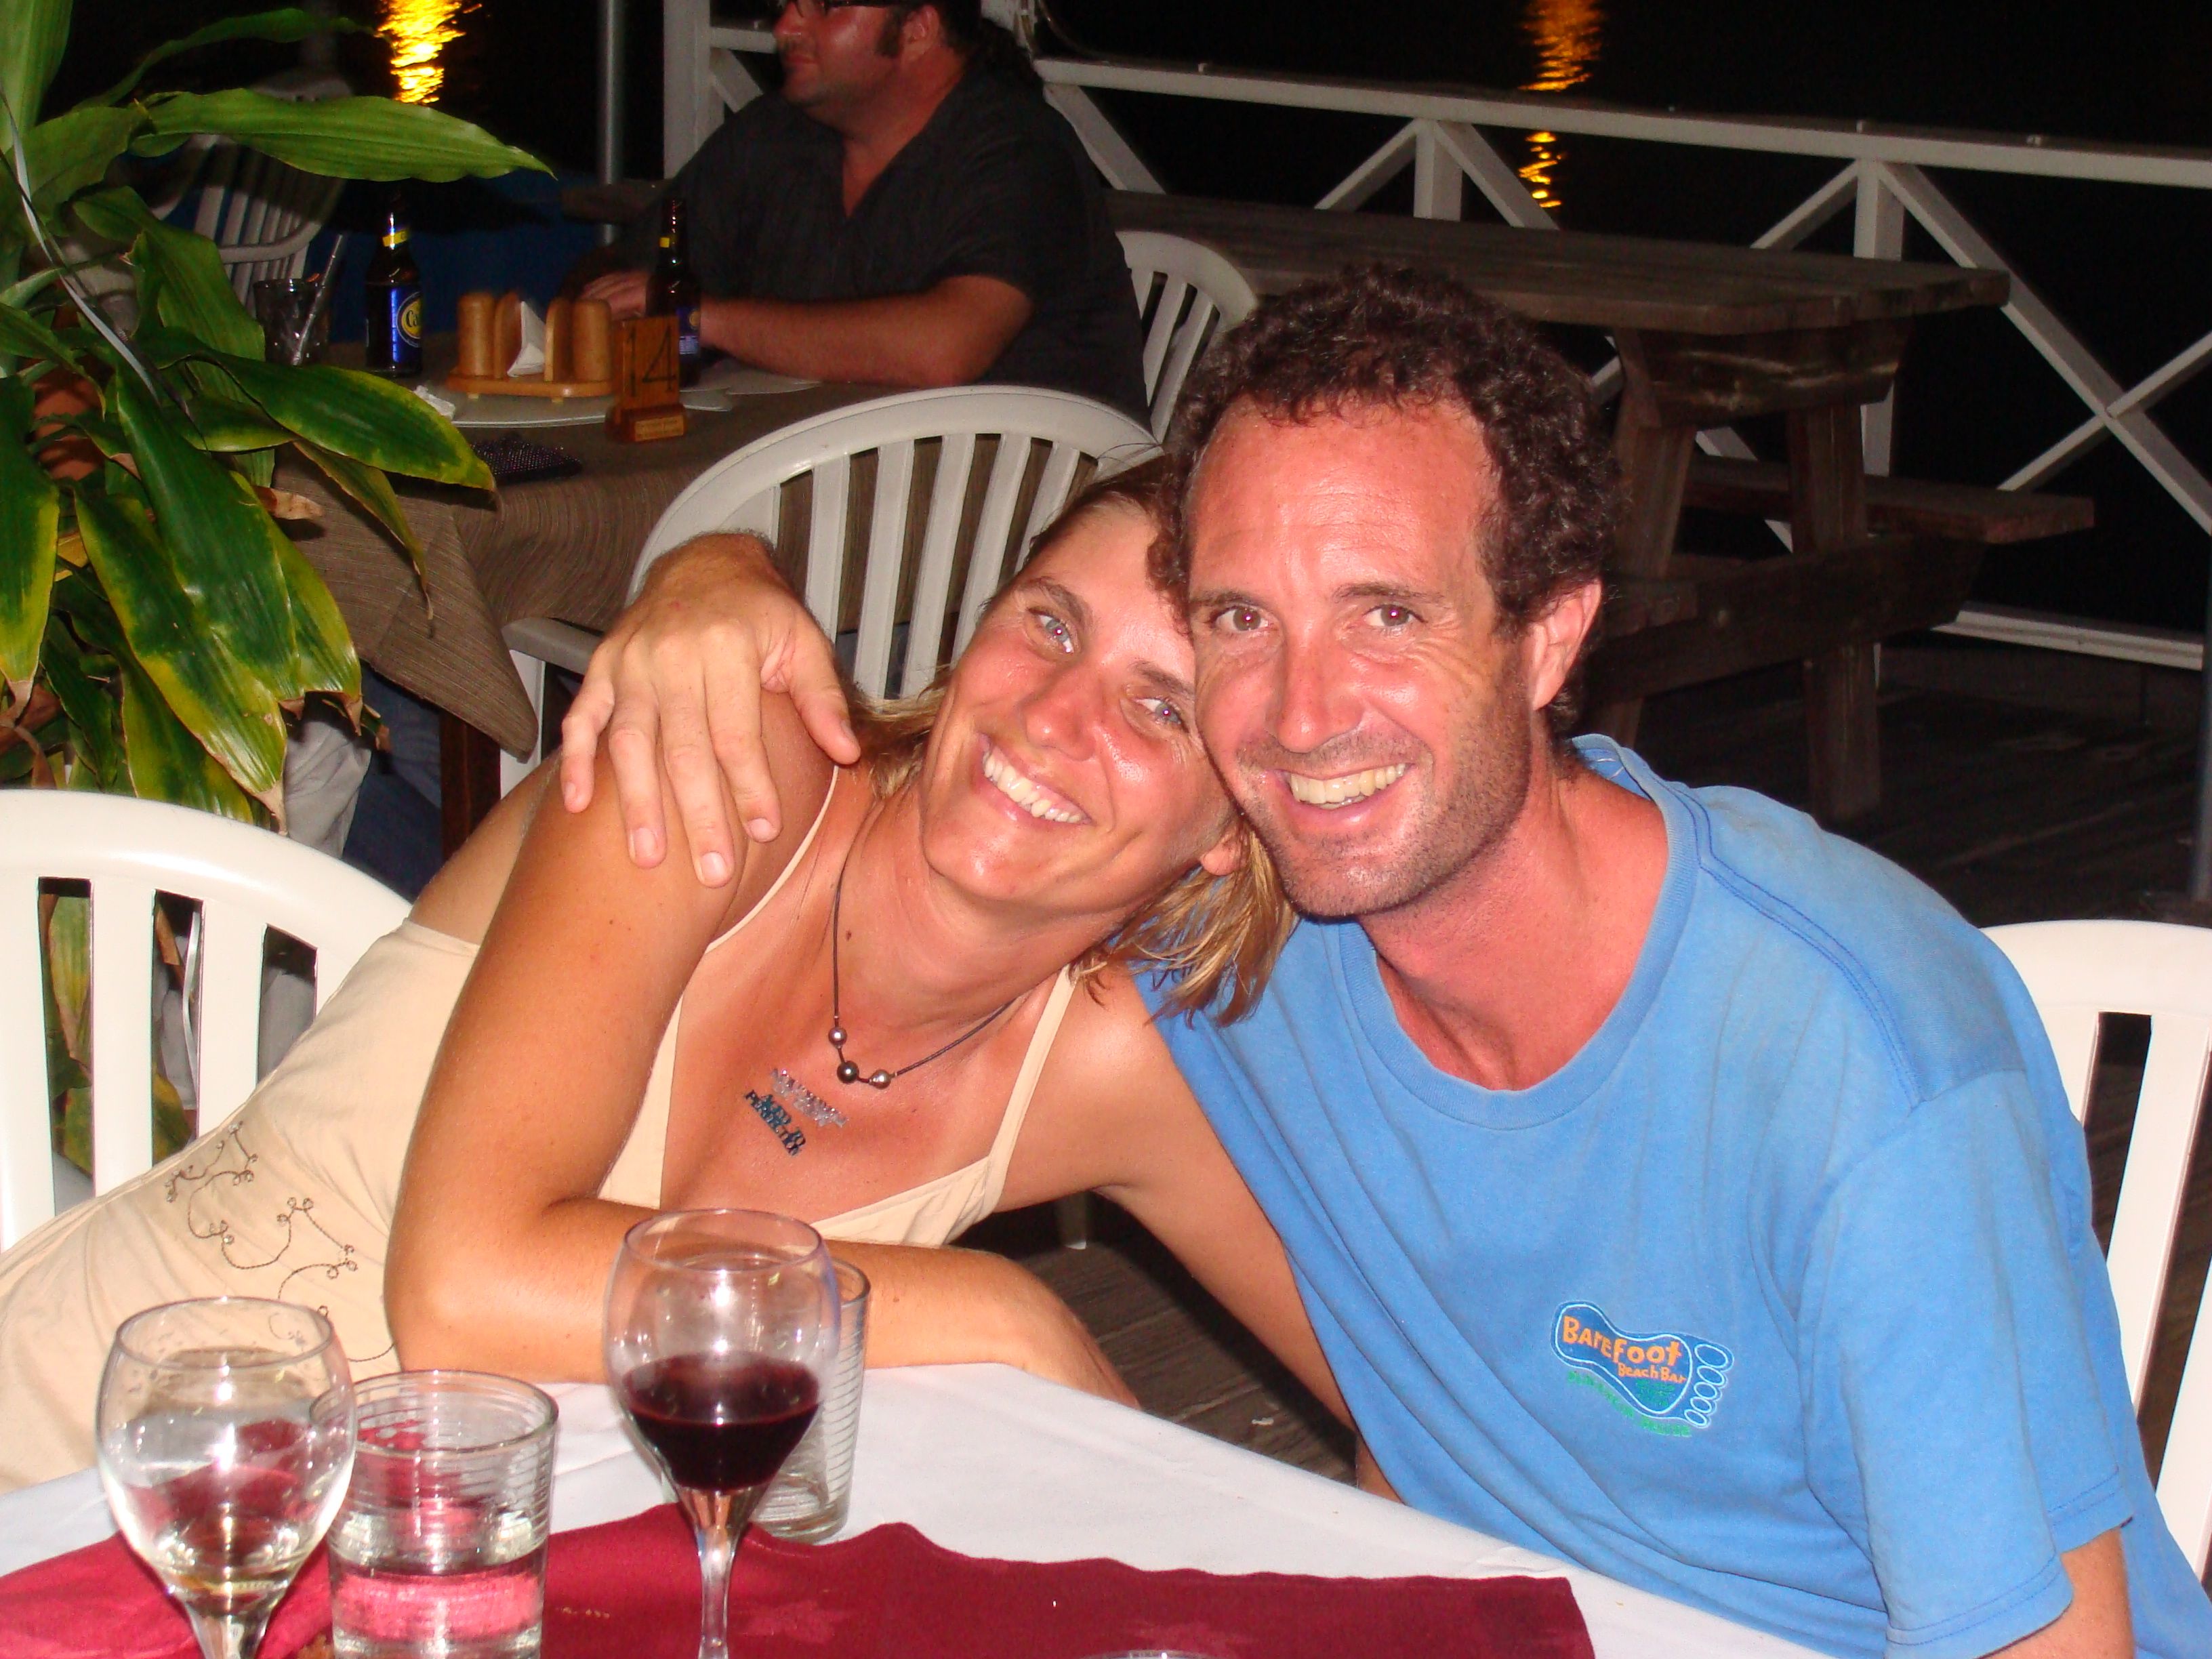 Liesbet and Mark -- pictured here several years later in Grenada -- grew close quickly when they first met.